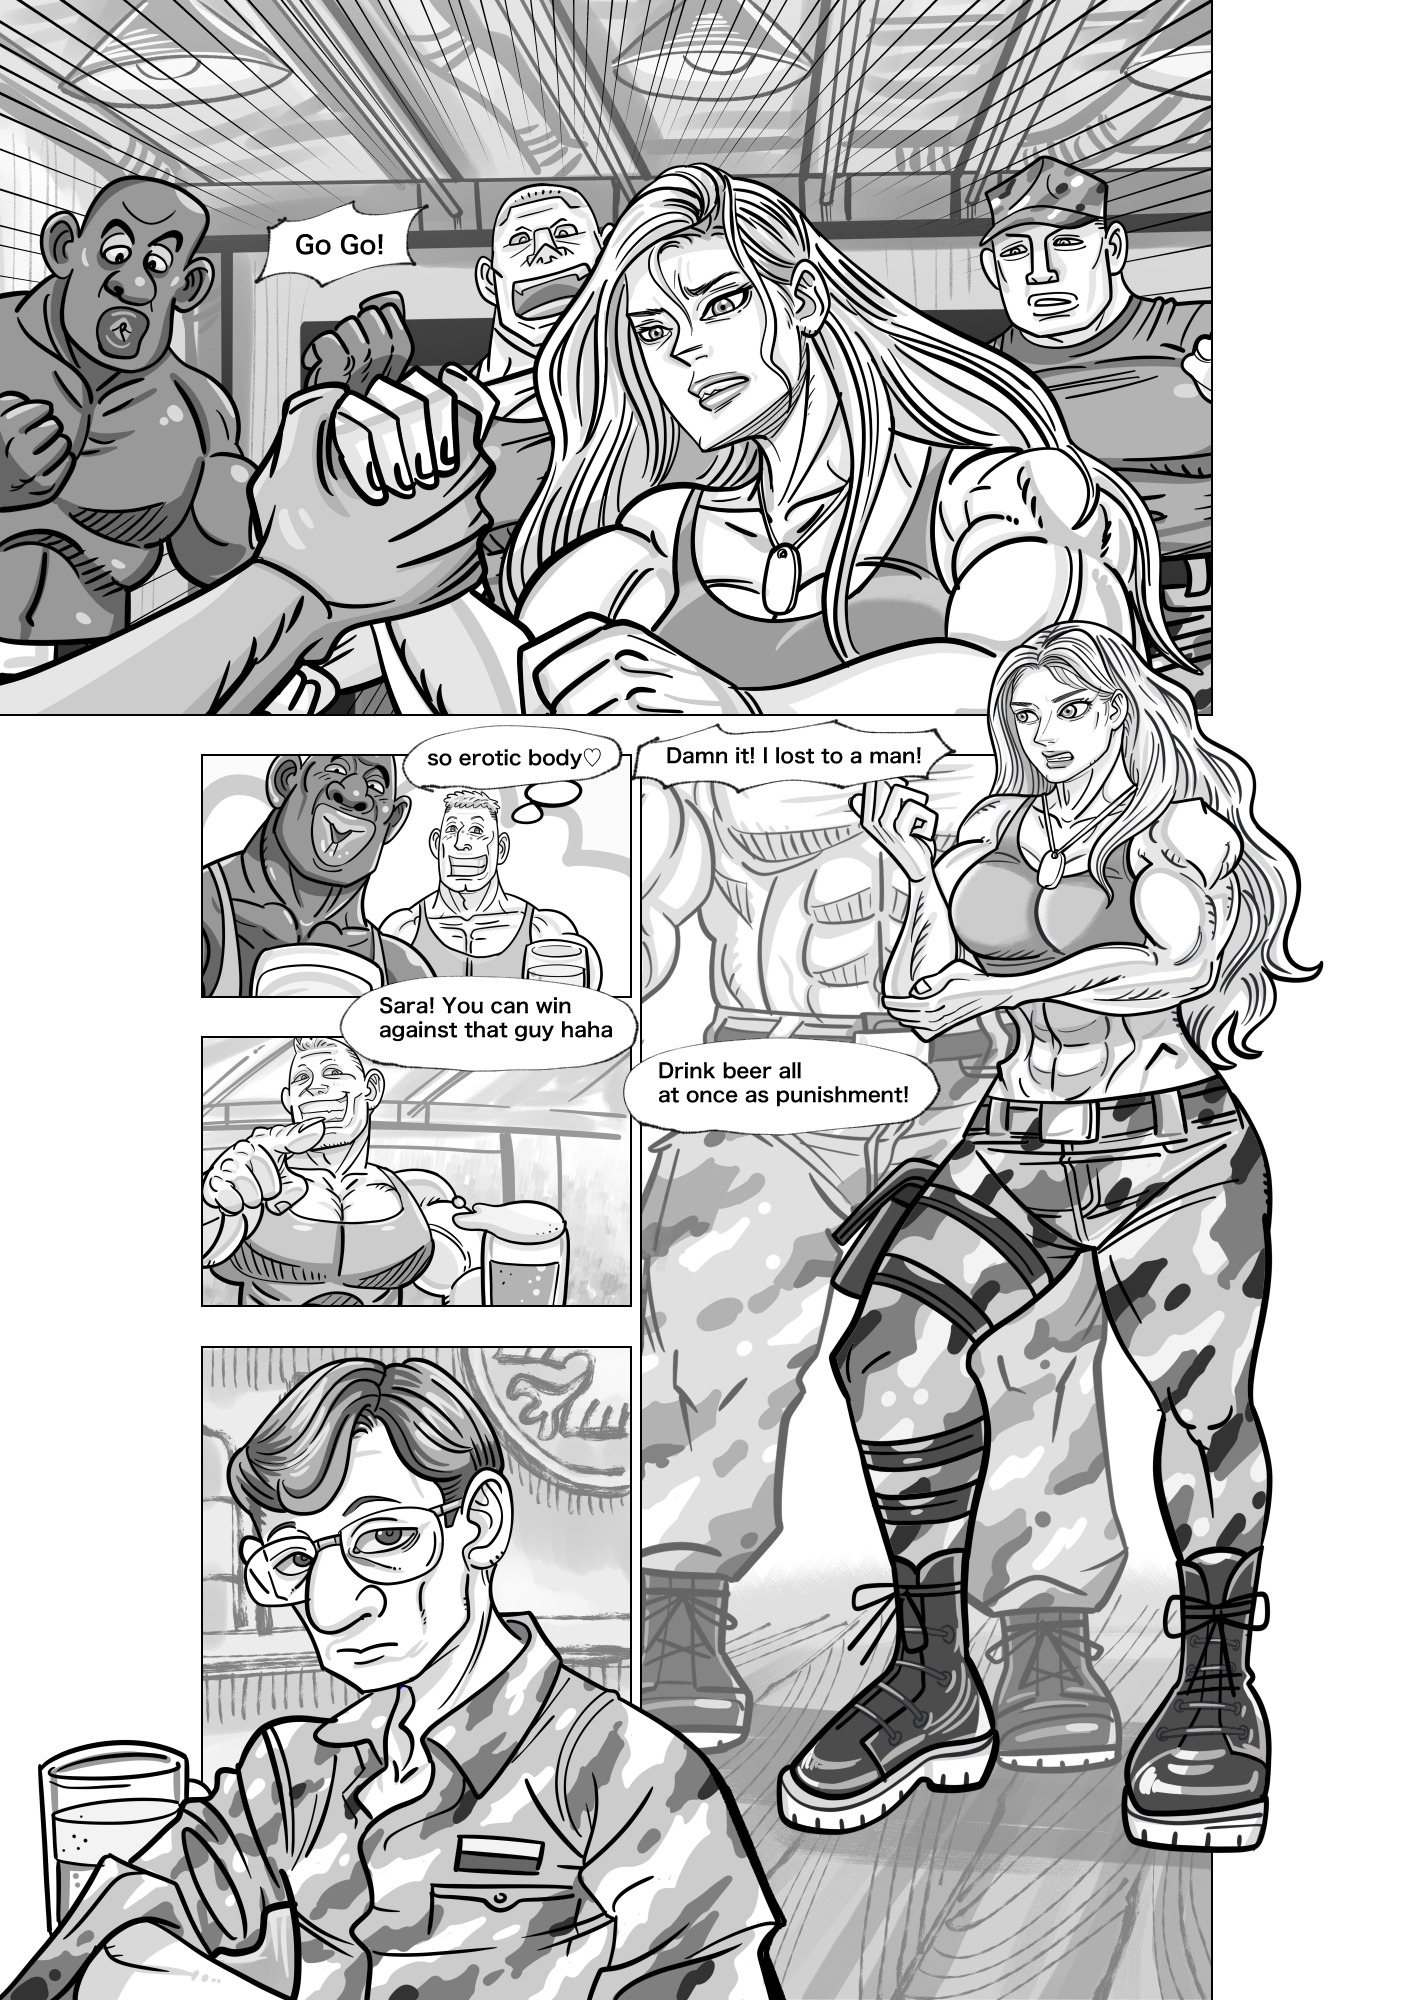 A comic where a female soldier is controlled as she pleases with a remote control 12 pages.